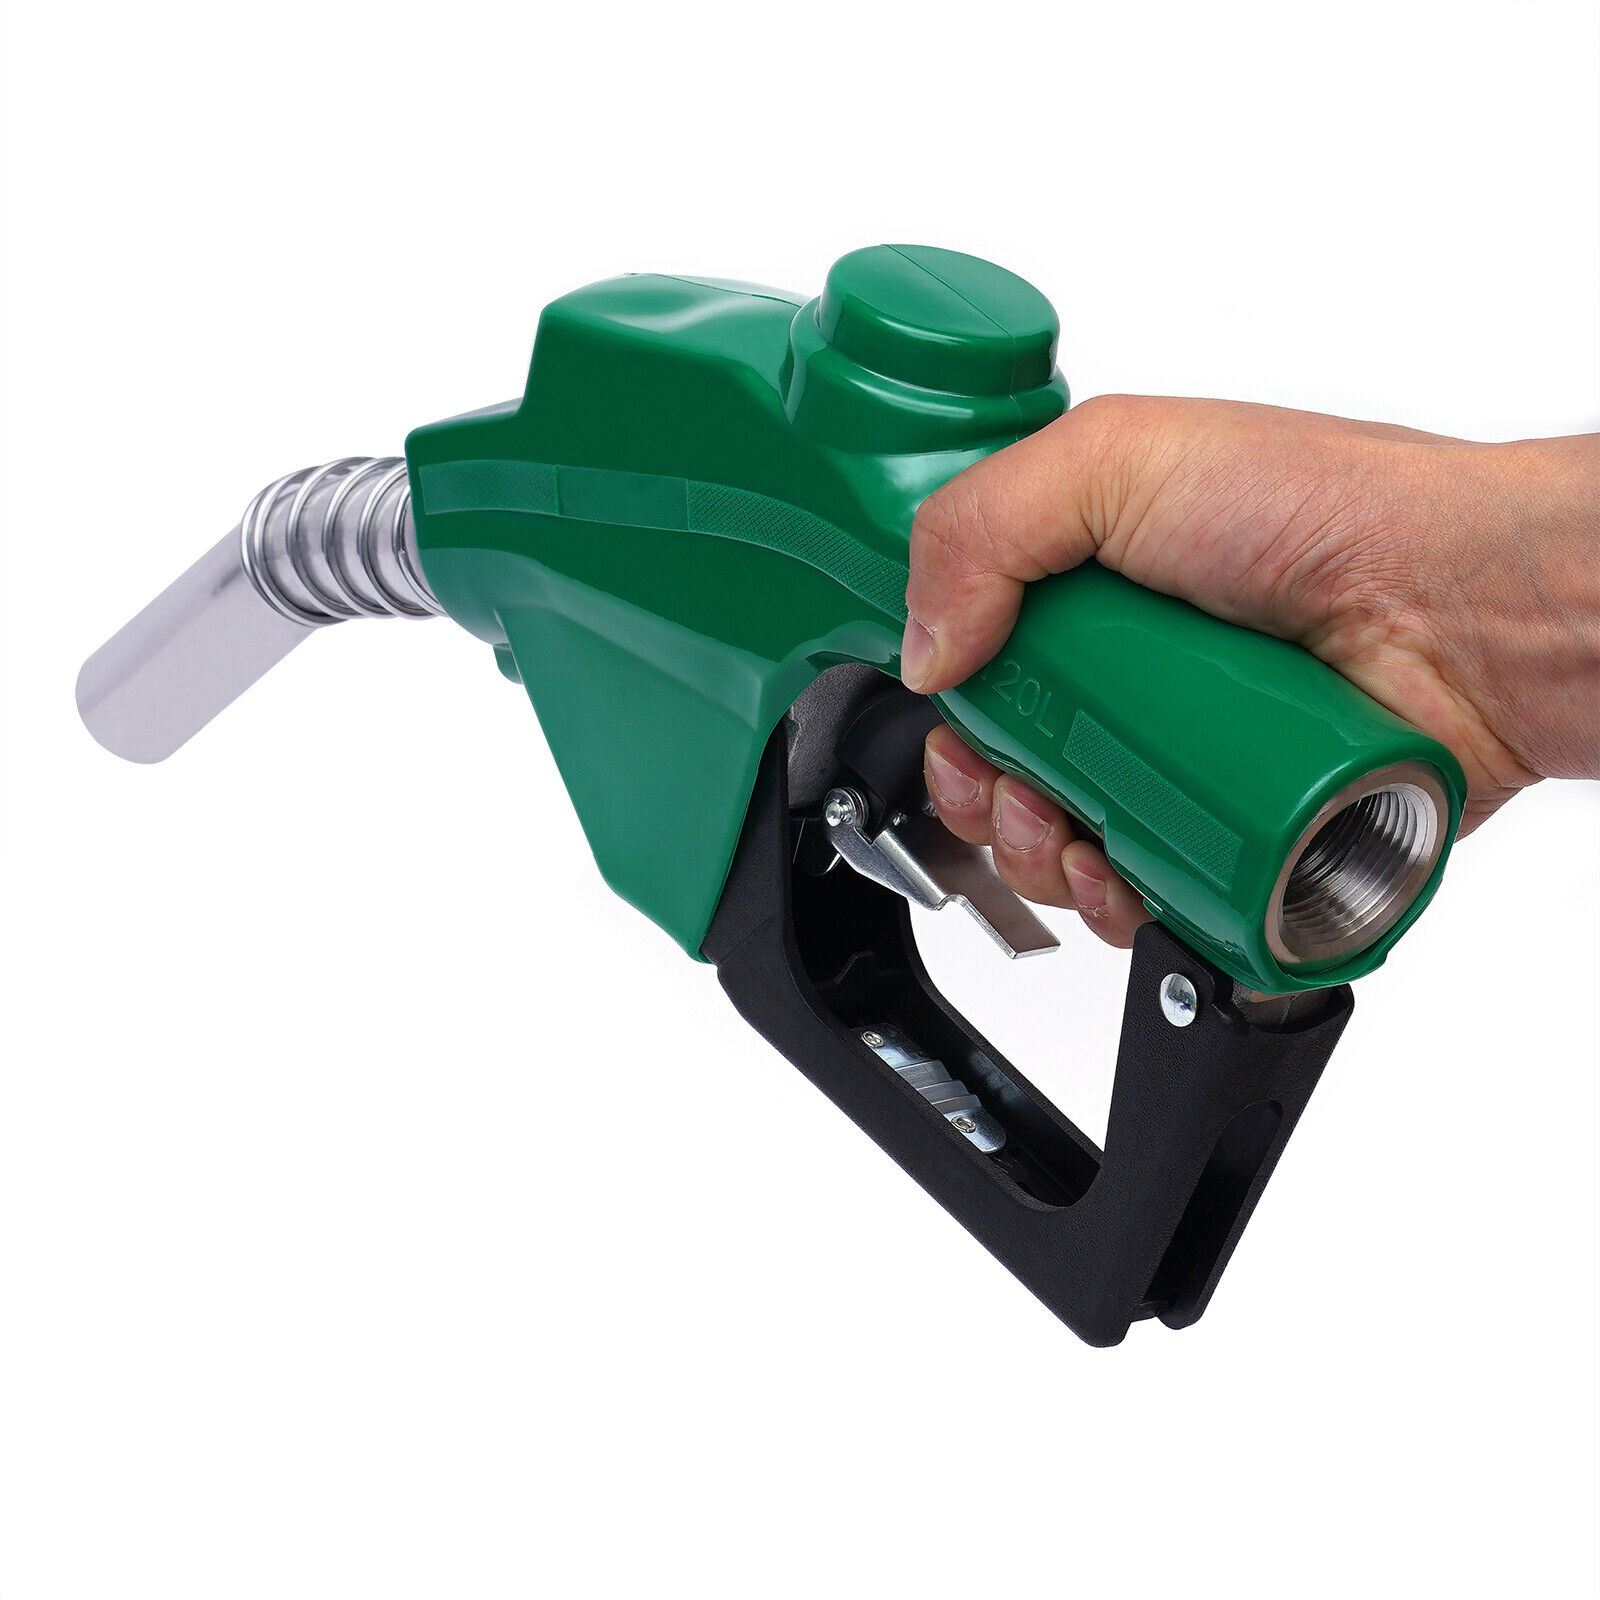 1 Inch Automatic Fuel Oil Pump Transfer Nozzle 7H Green Gas Refueling Tool - image 5 of 12